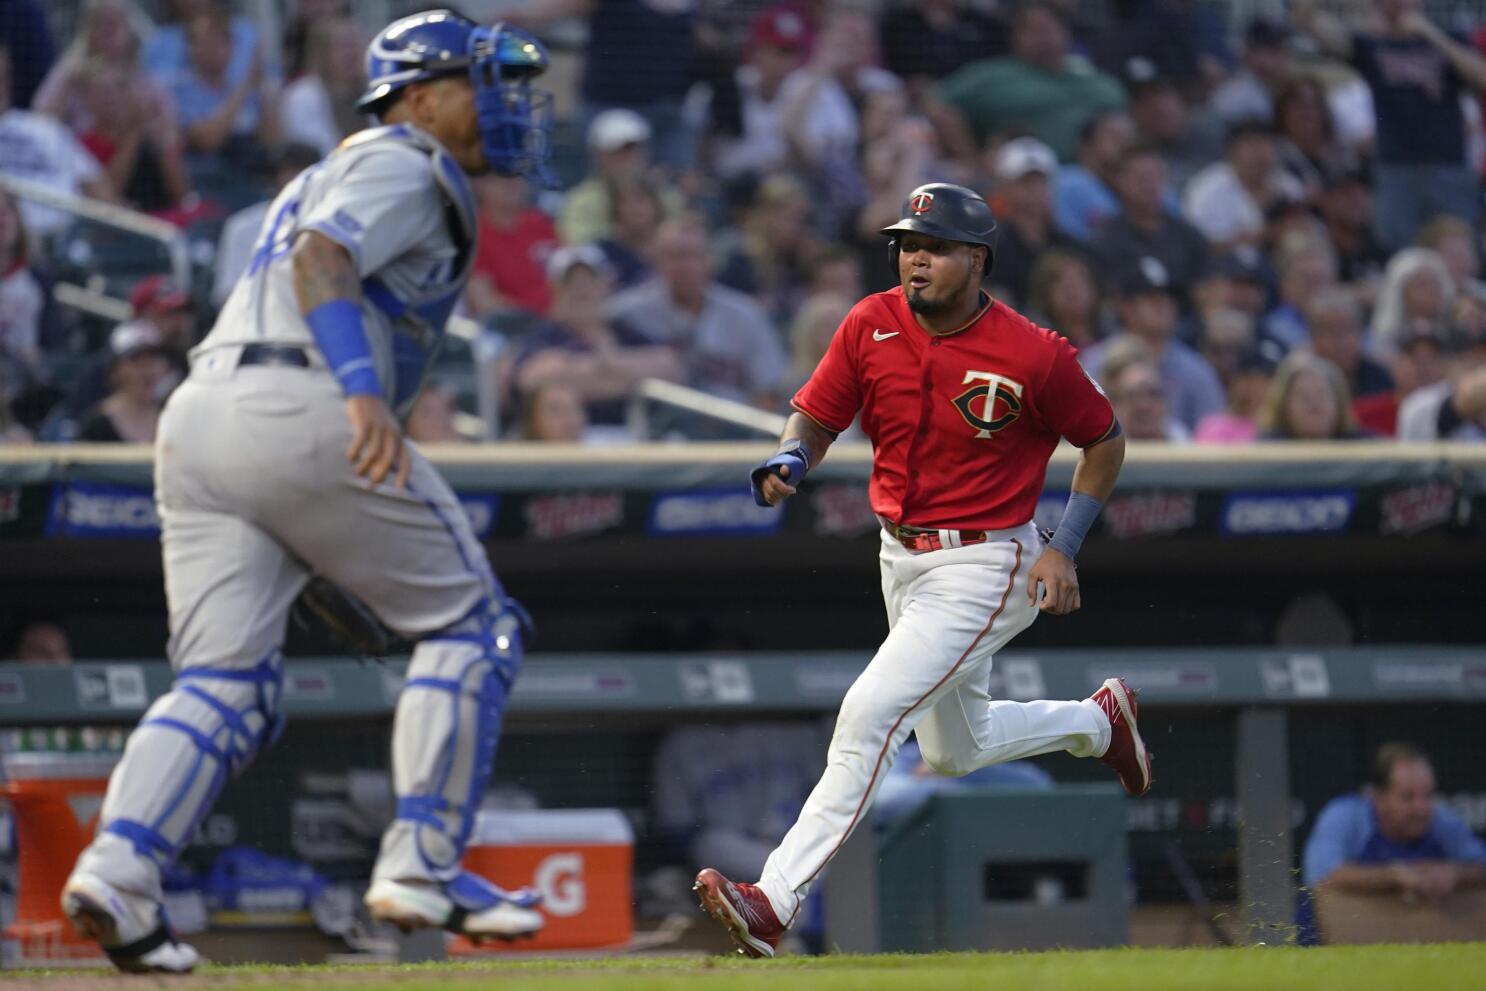 Twins bats get going in 4-2 win over Royals